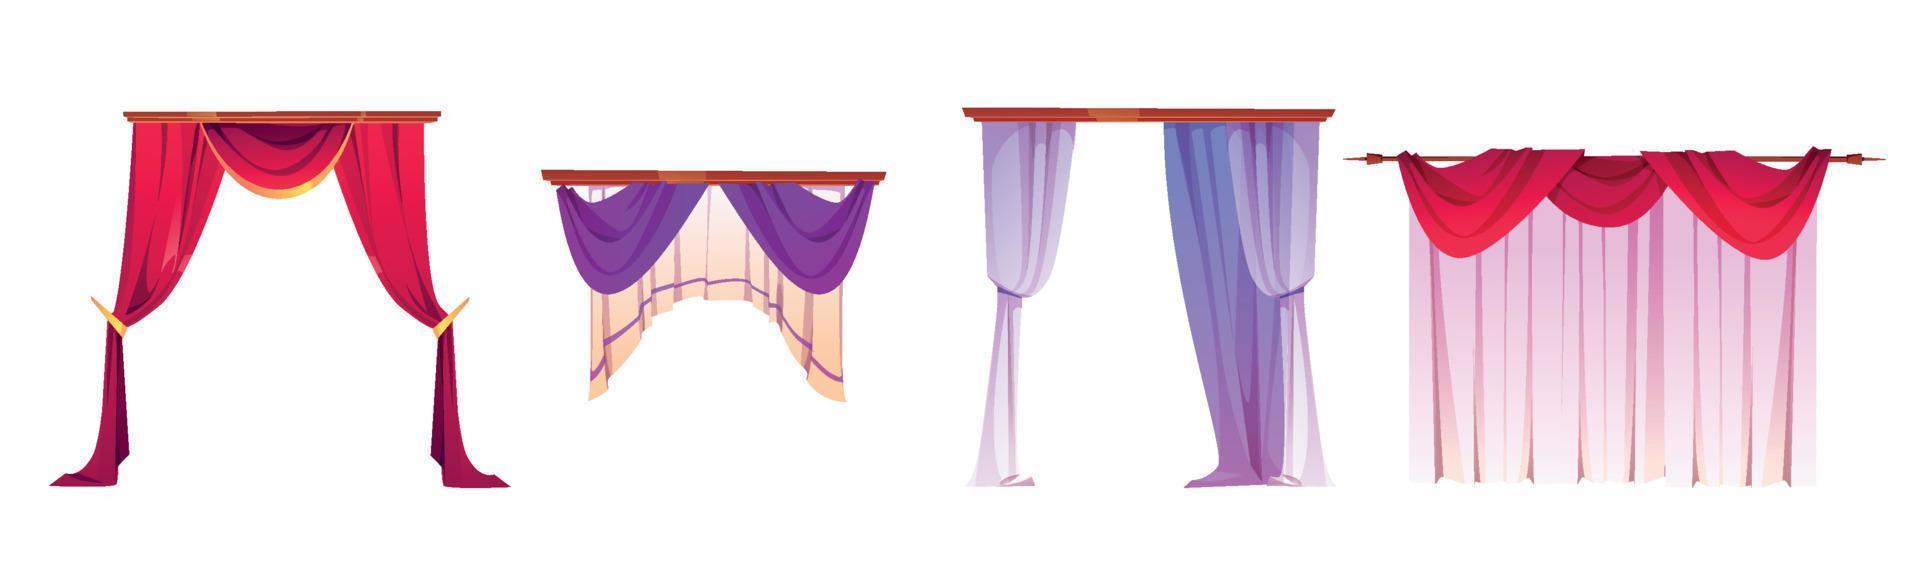 Windows with different style curtains cartoon vector